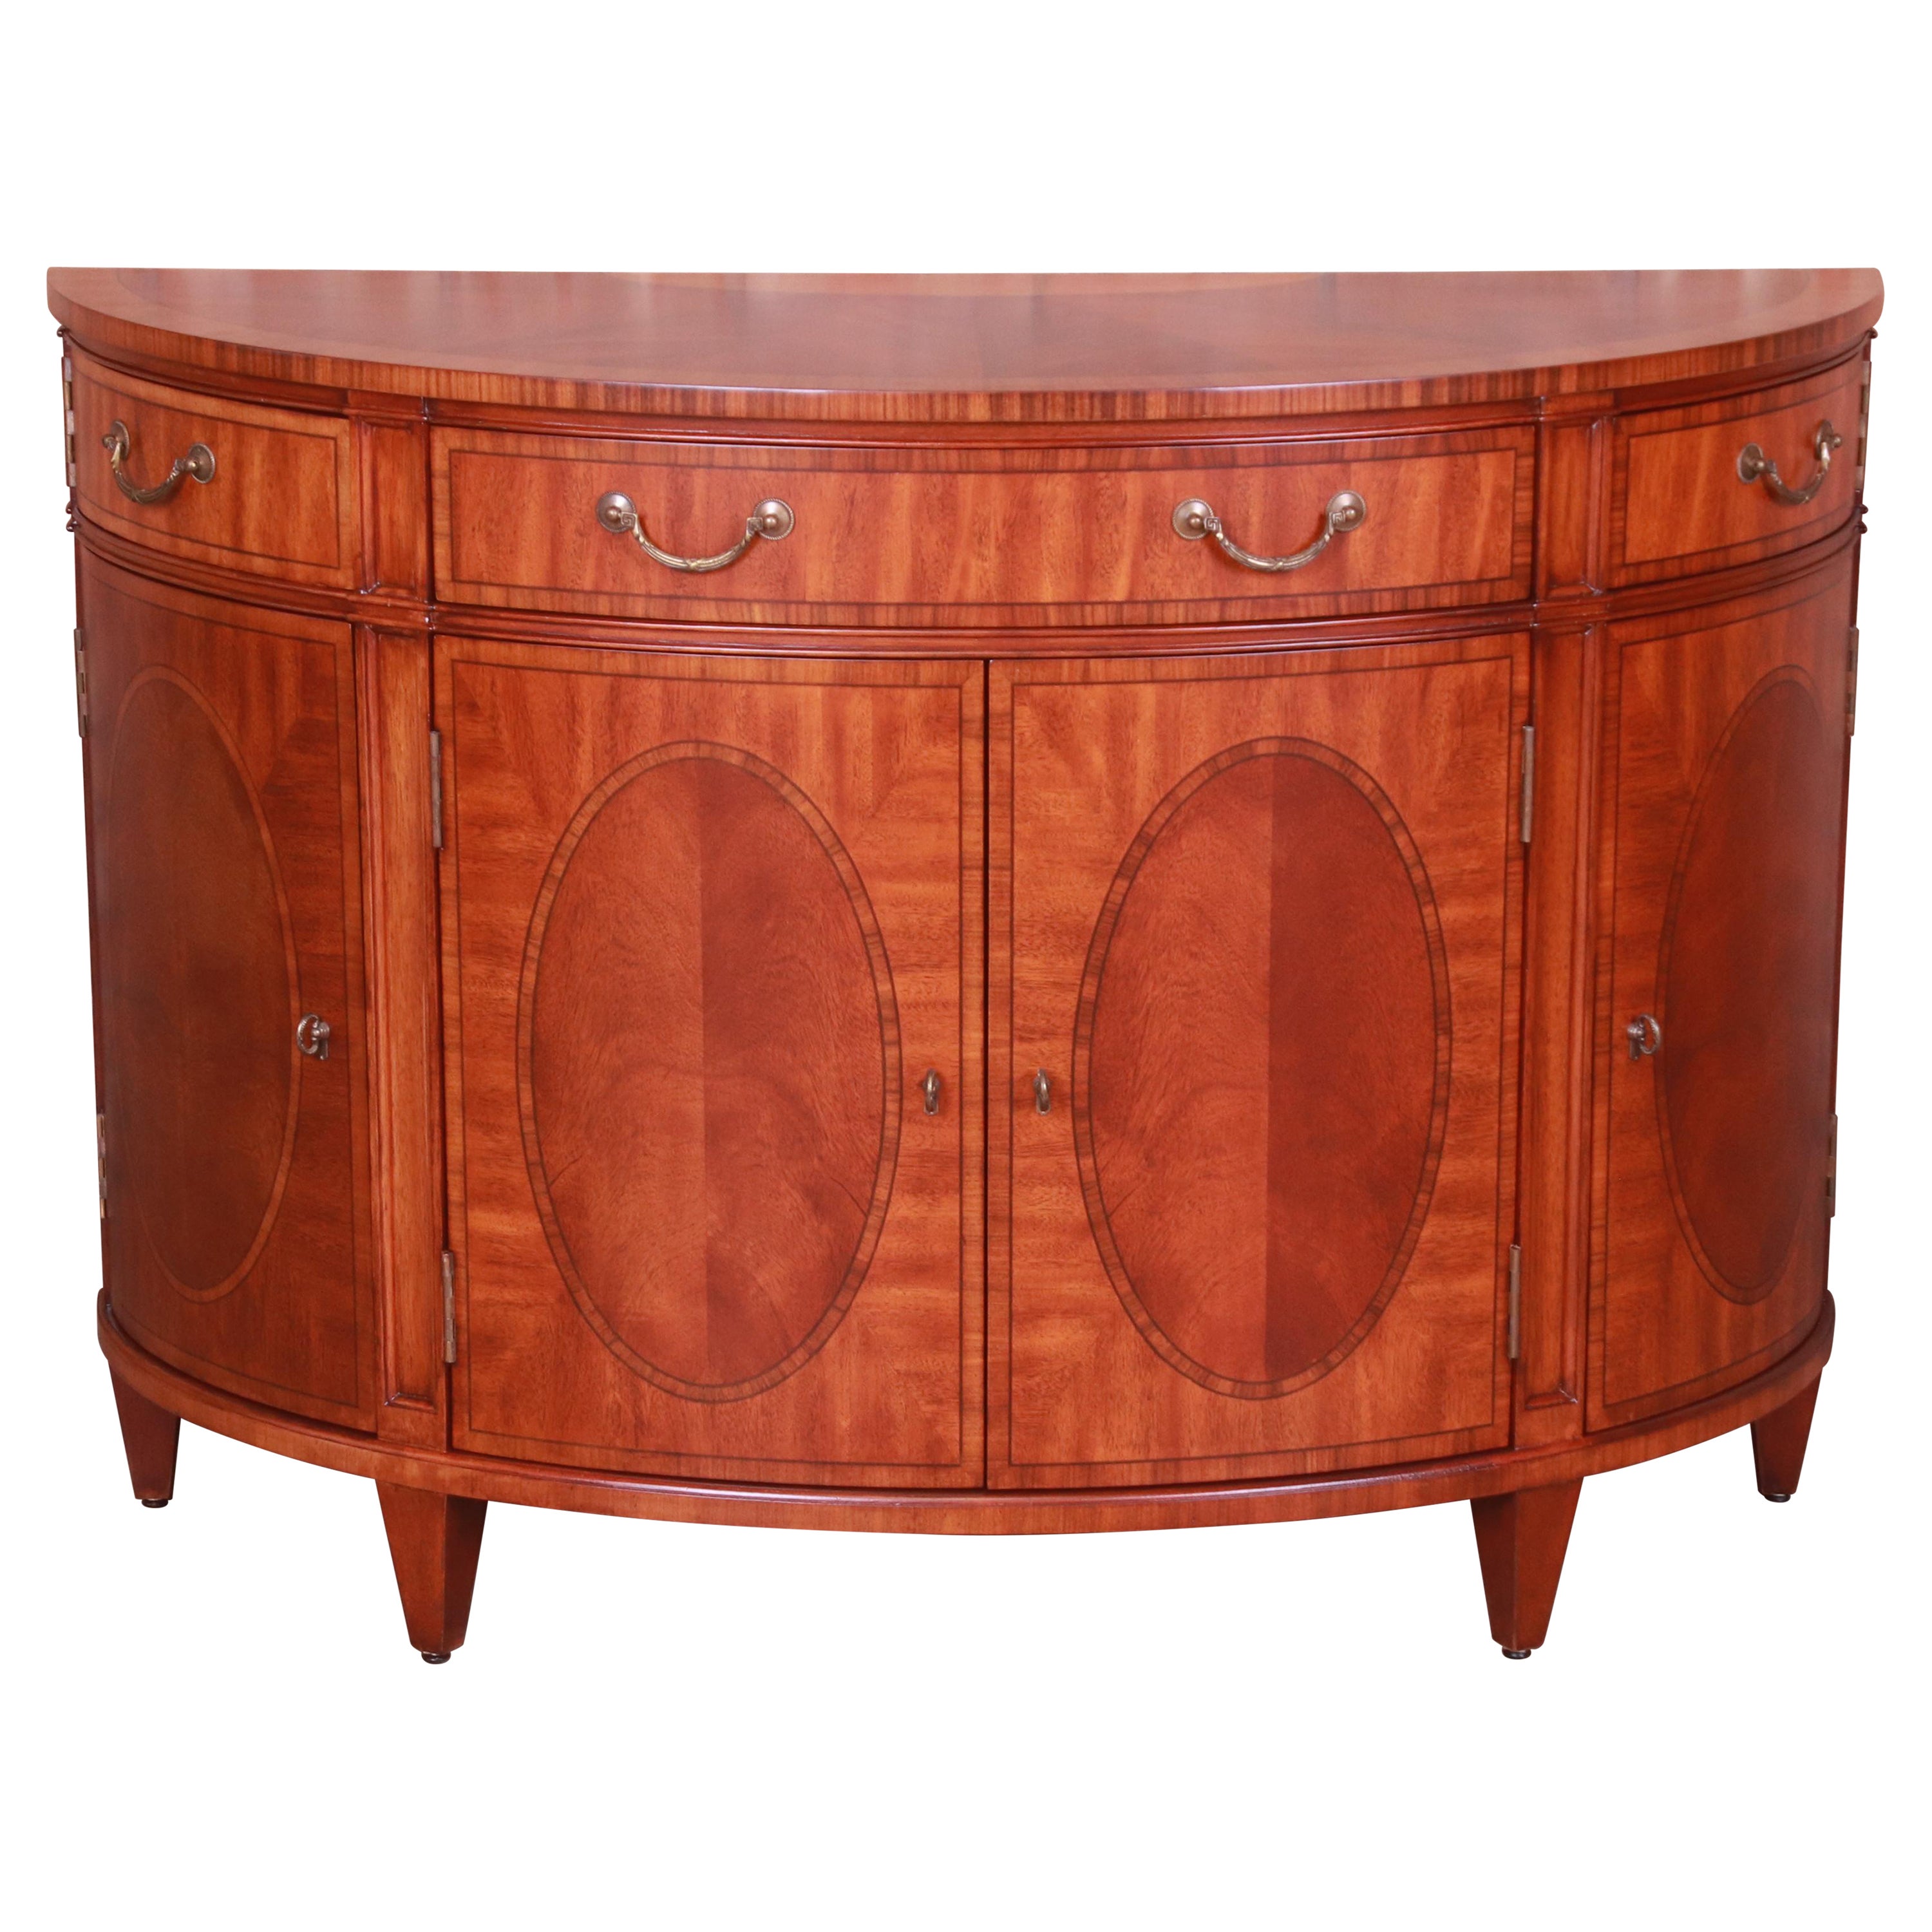 Ethan Allen Regency Inlaid Mahogany Demilune Console or Bar Cabinet, Refinished